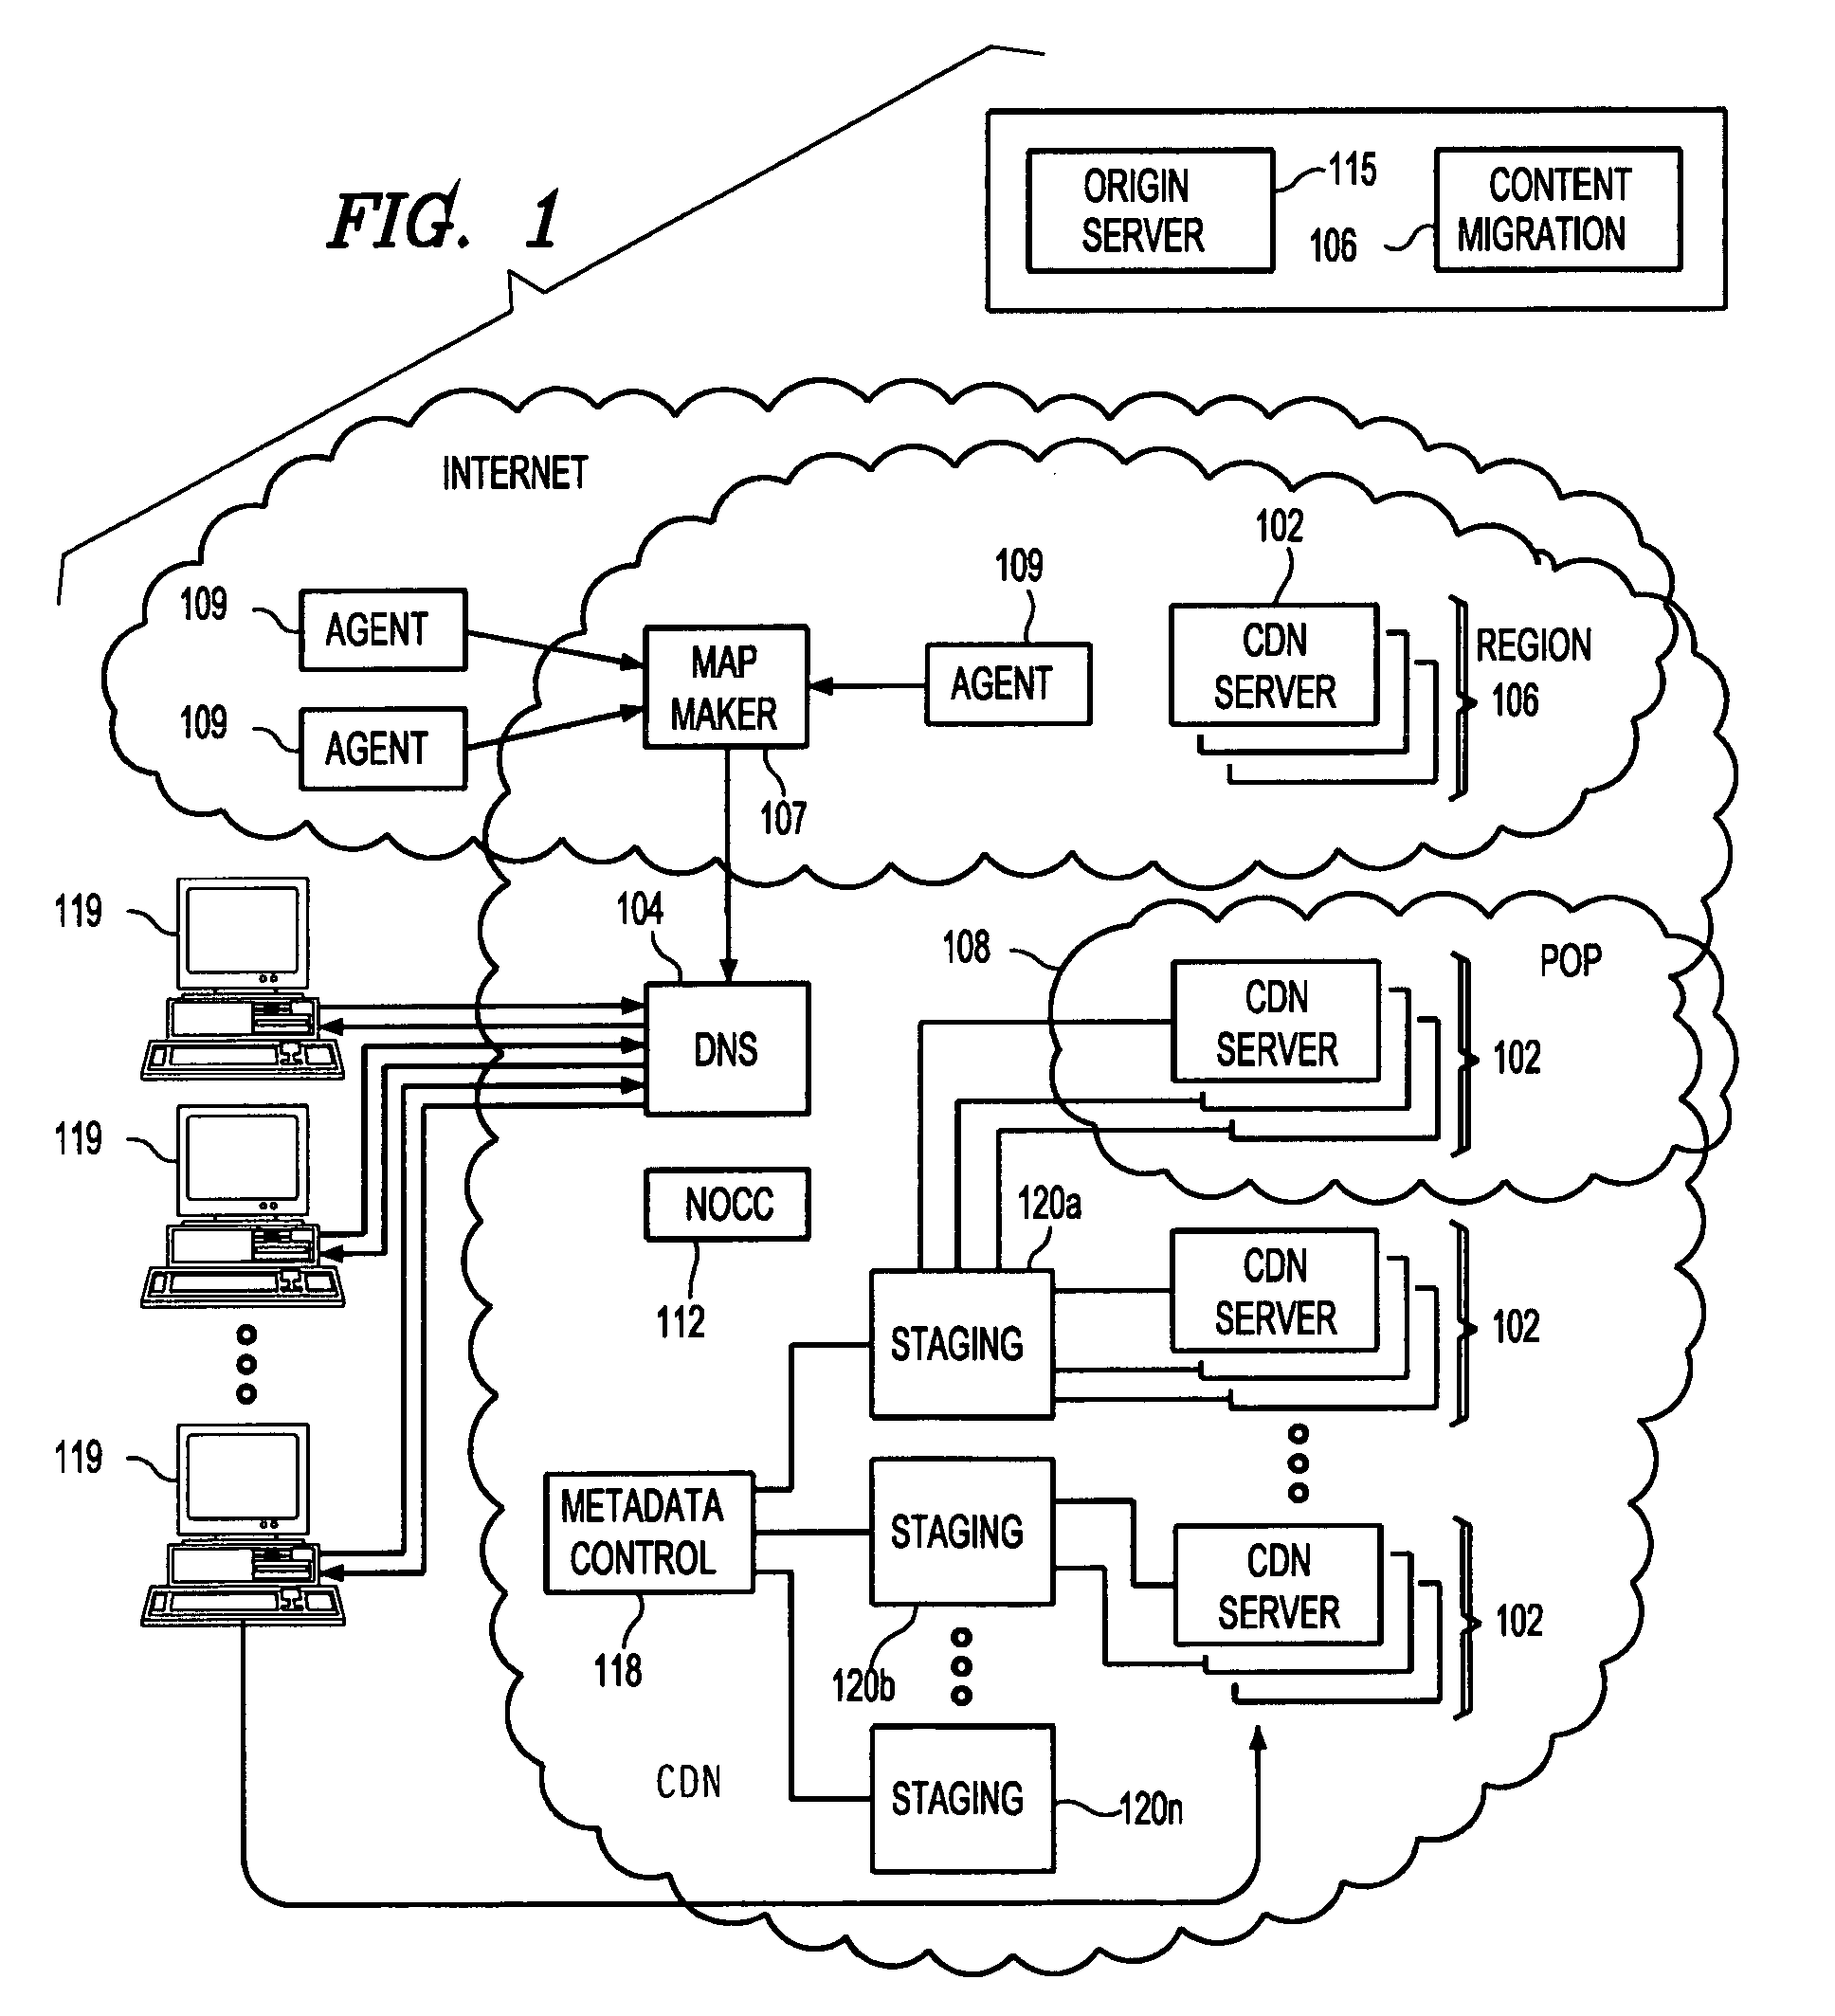 Method and system for providing on-demand content delivery for an origin server